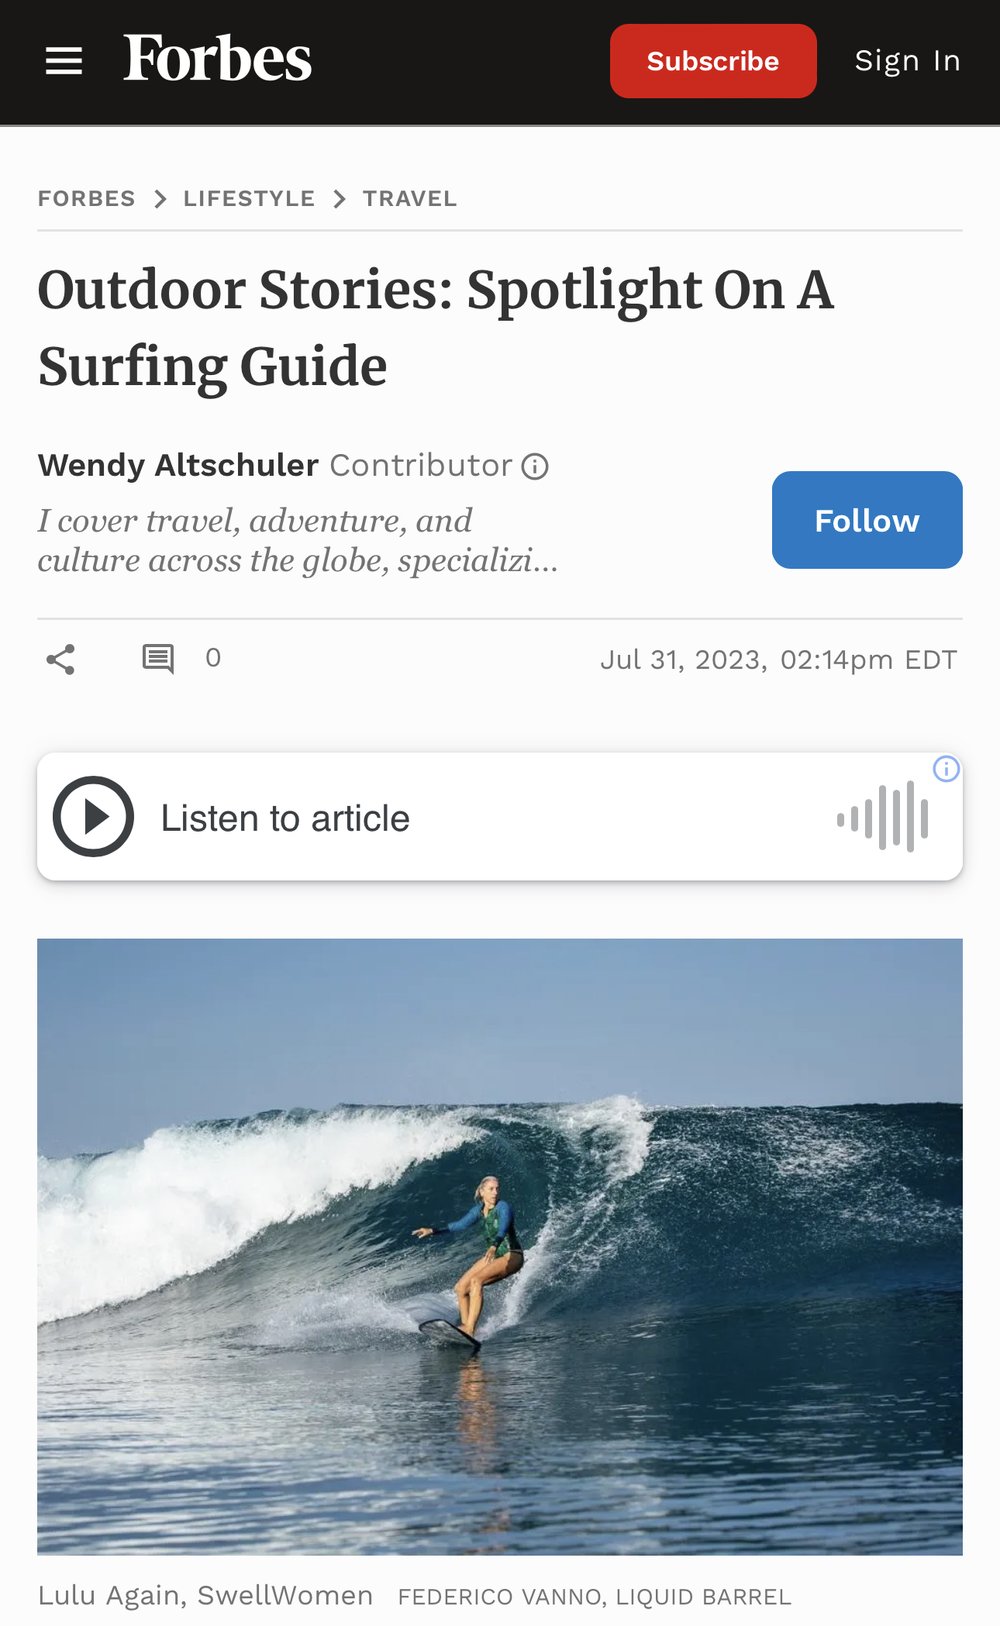 Outdoor Stories: Spotlight On A Surfing Guide